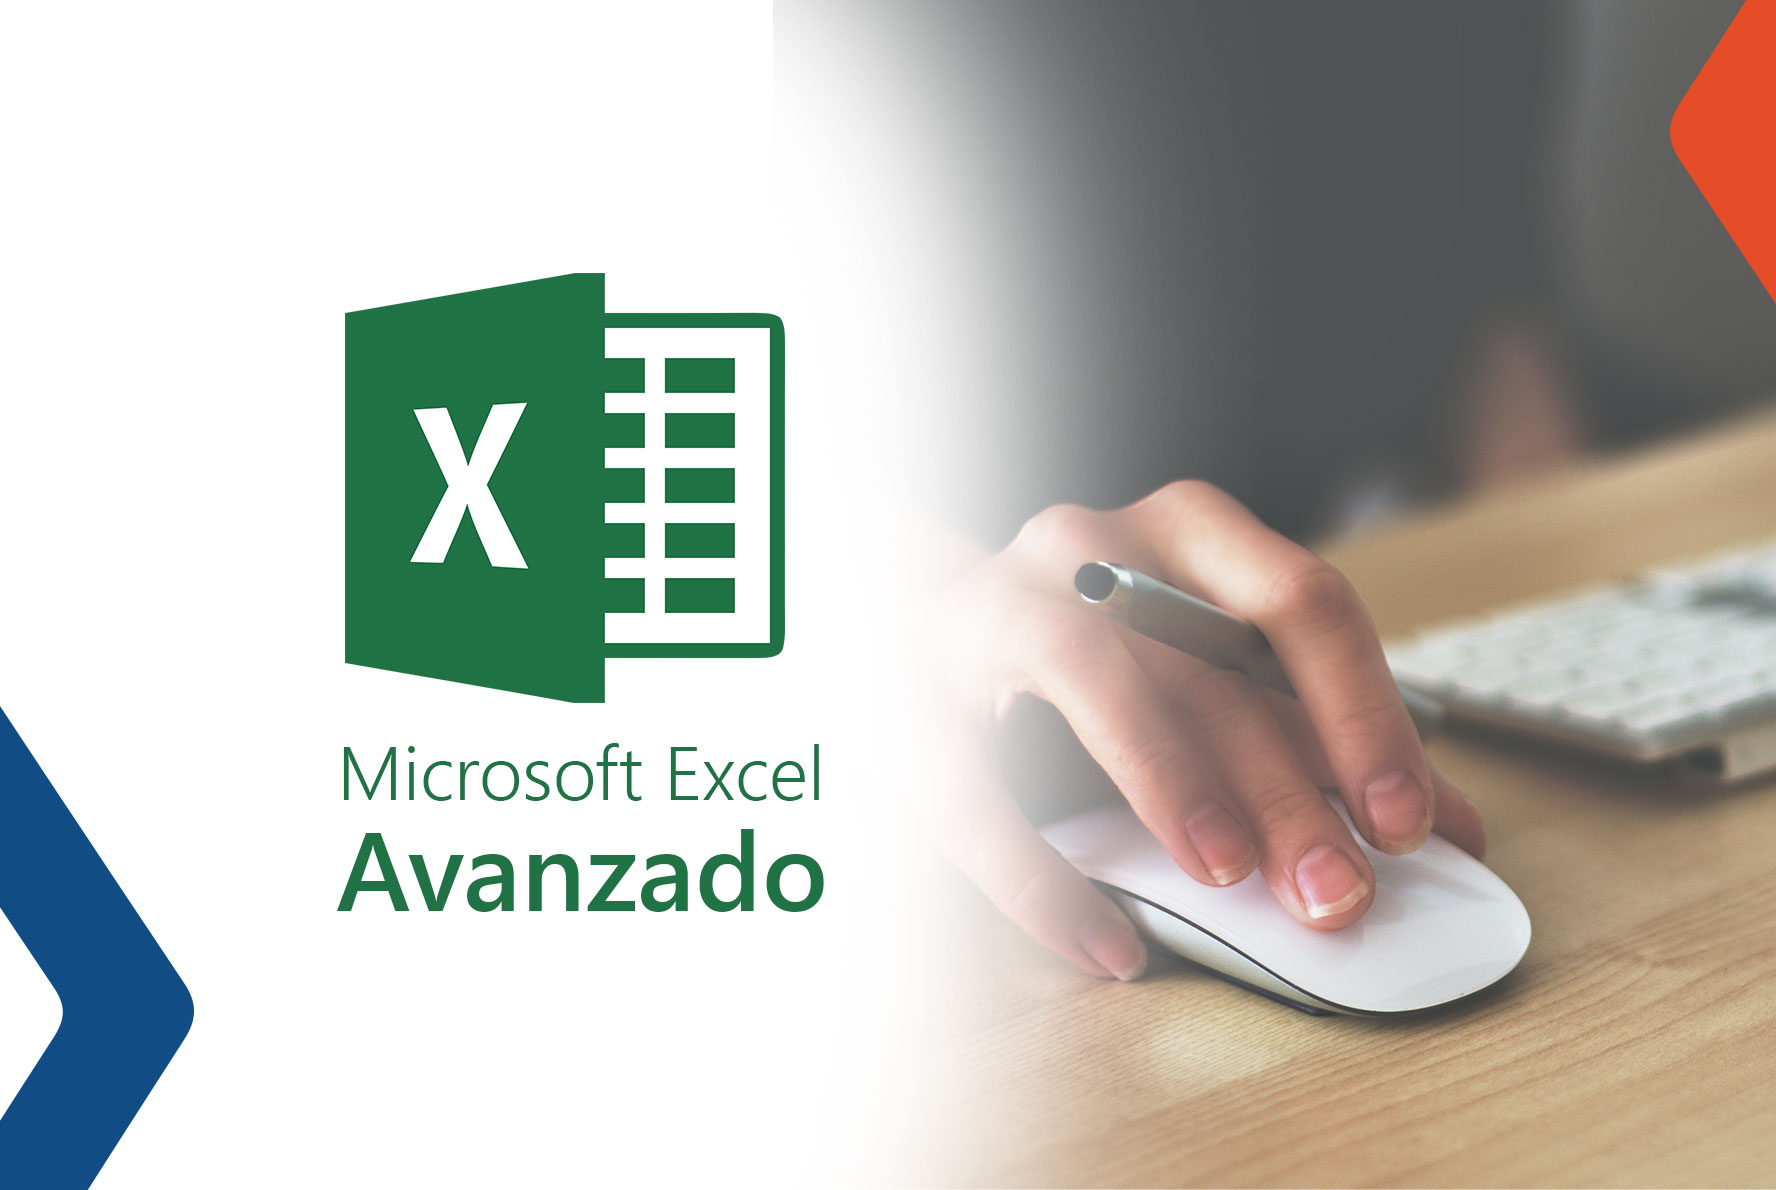  Advanced Microsoft Excel for optimization of work in the company